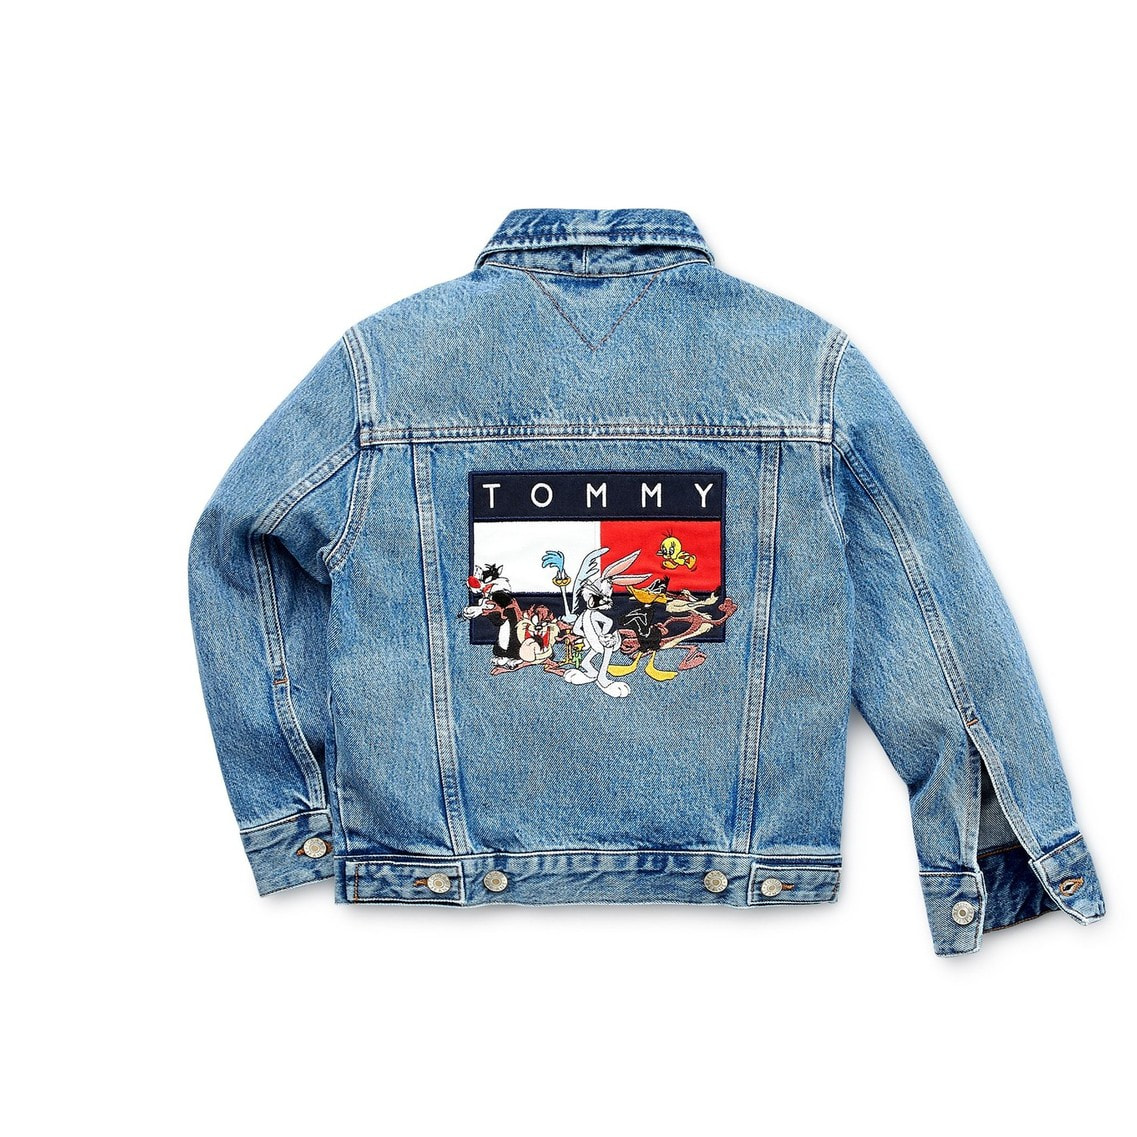 Tommy Jeans Looney Tunes Denim Jacket 